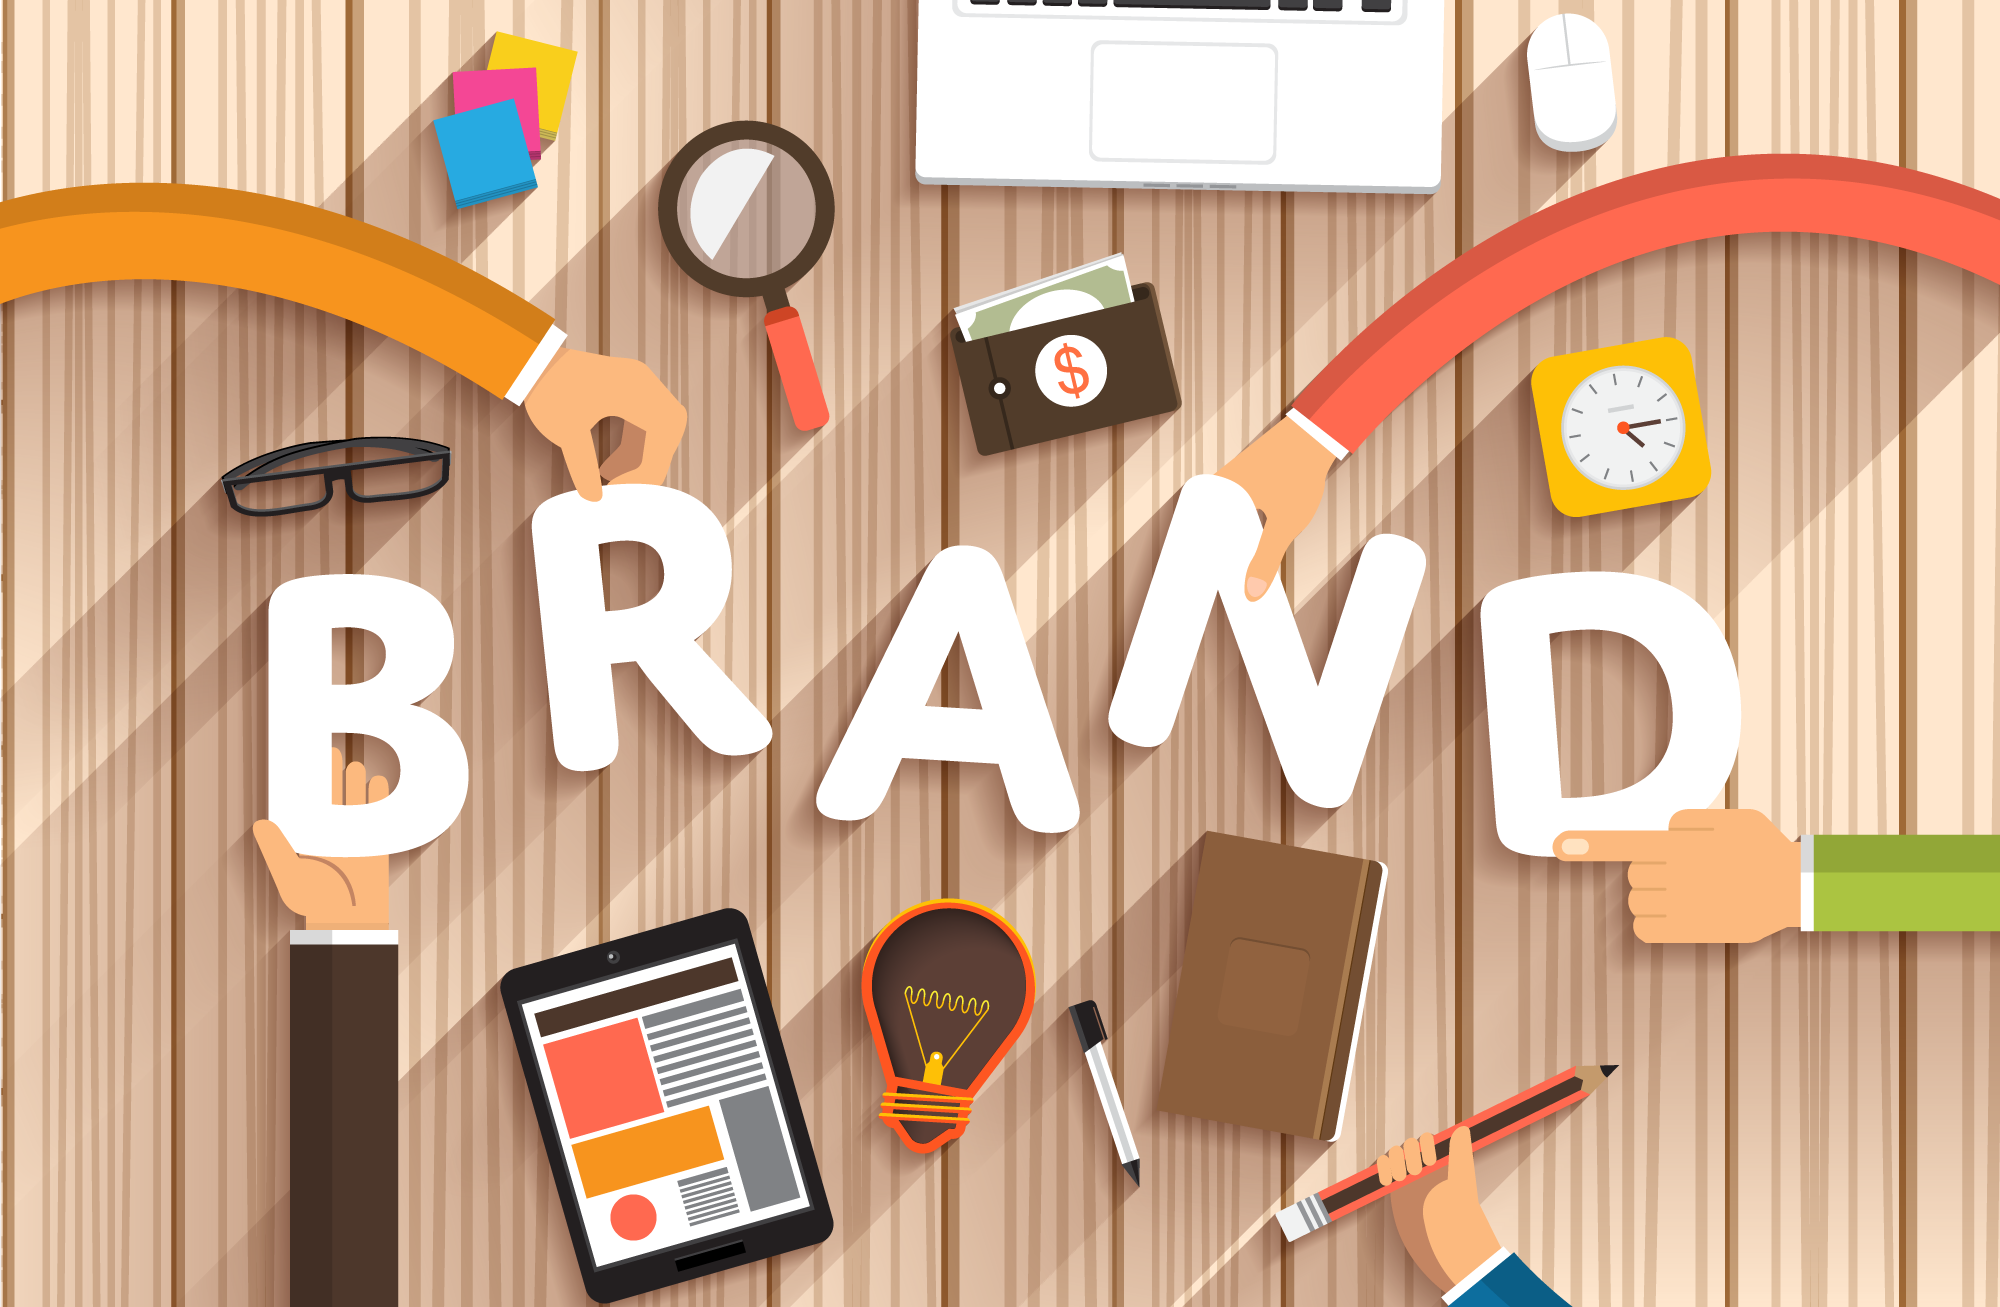 How to make the brand an asset for the company? Branding 